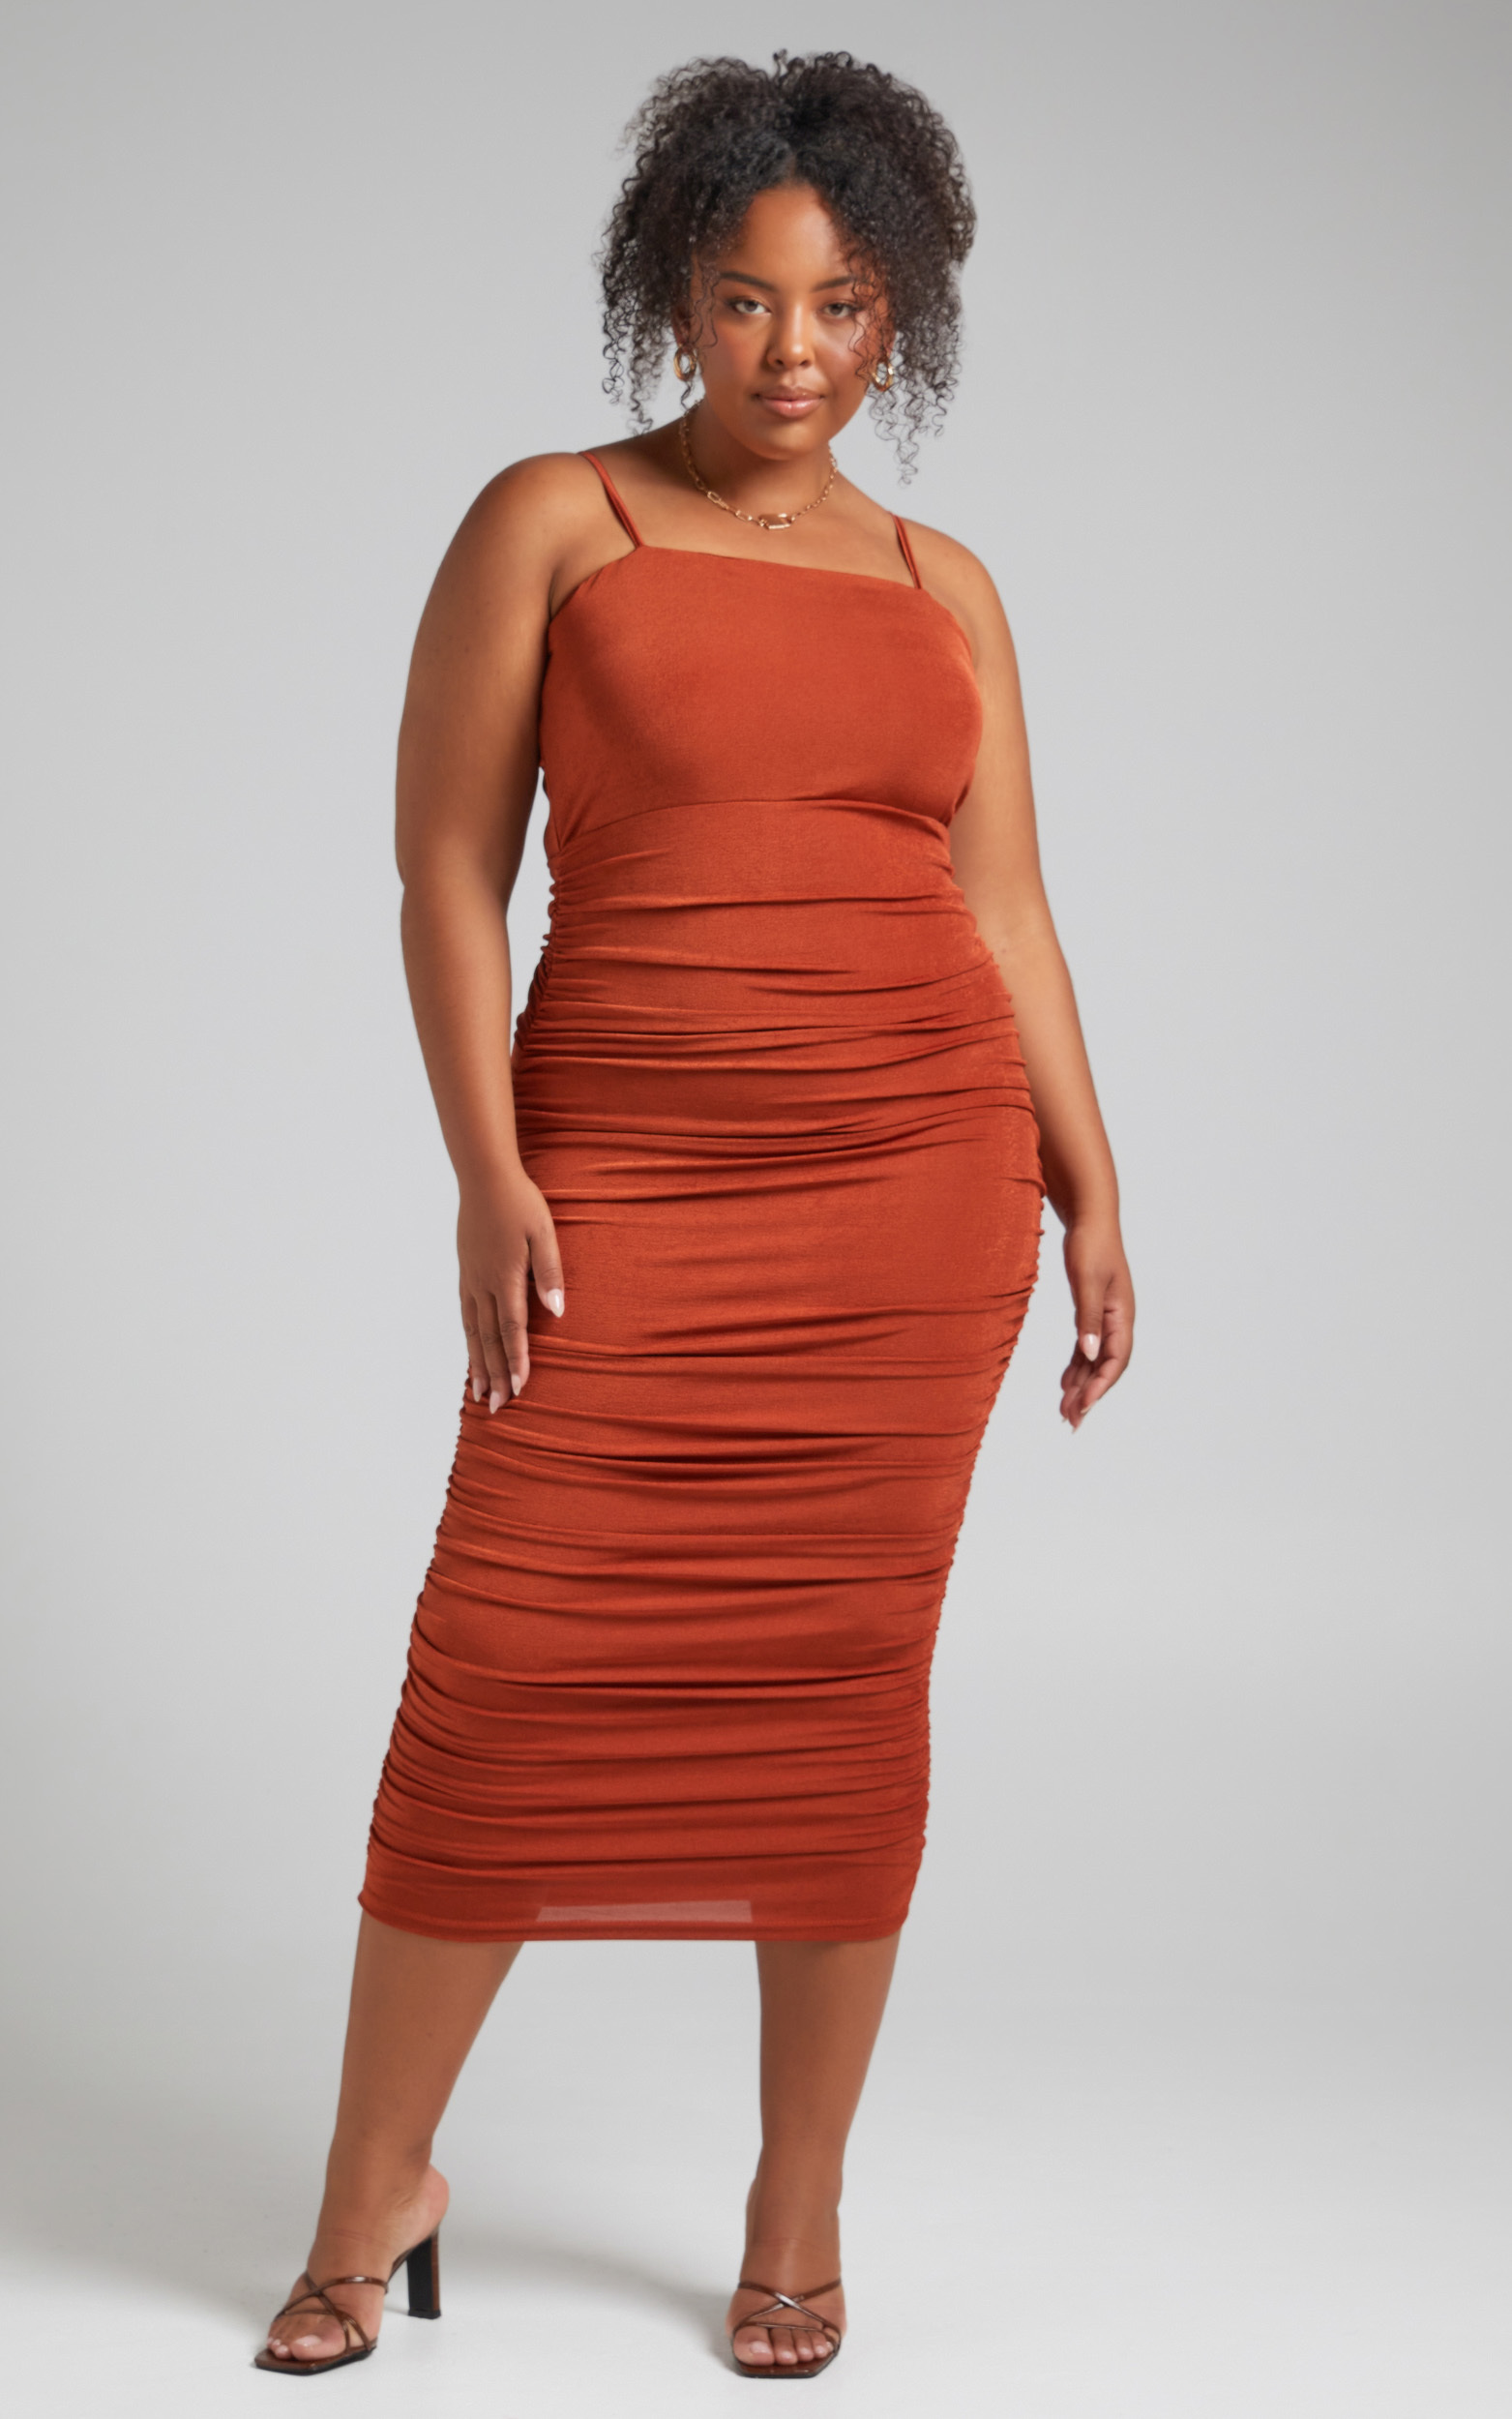 Commit To Me Bodycon Midi Dress in Rust - 04, BRN1, hi-res image number null